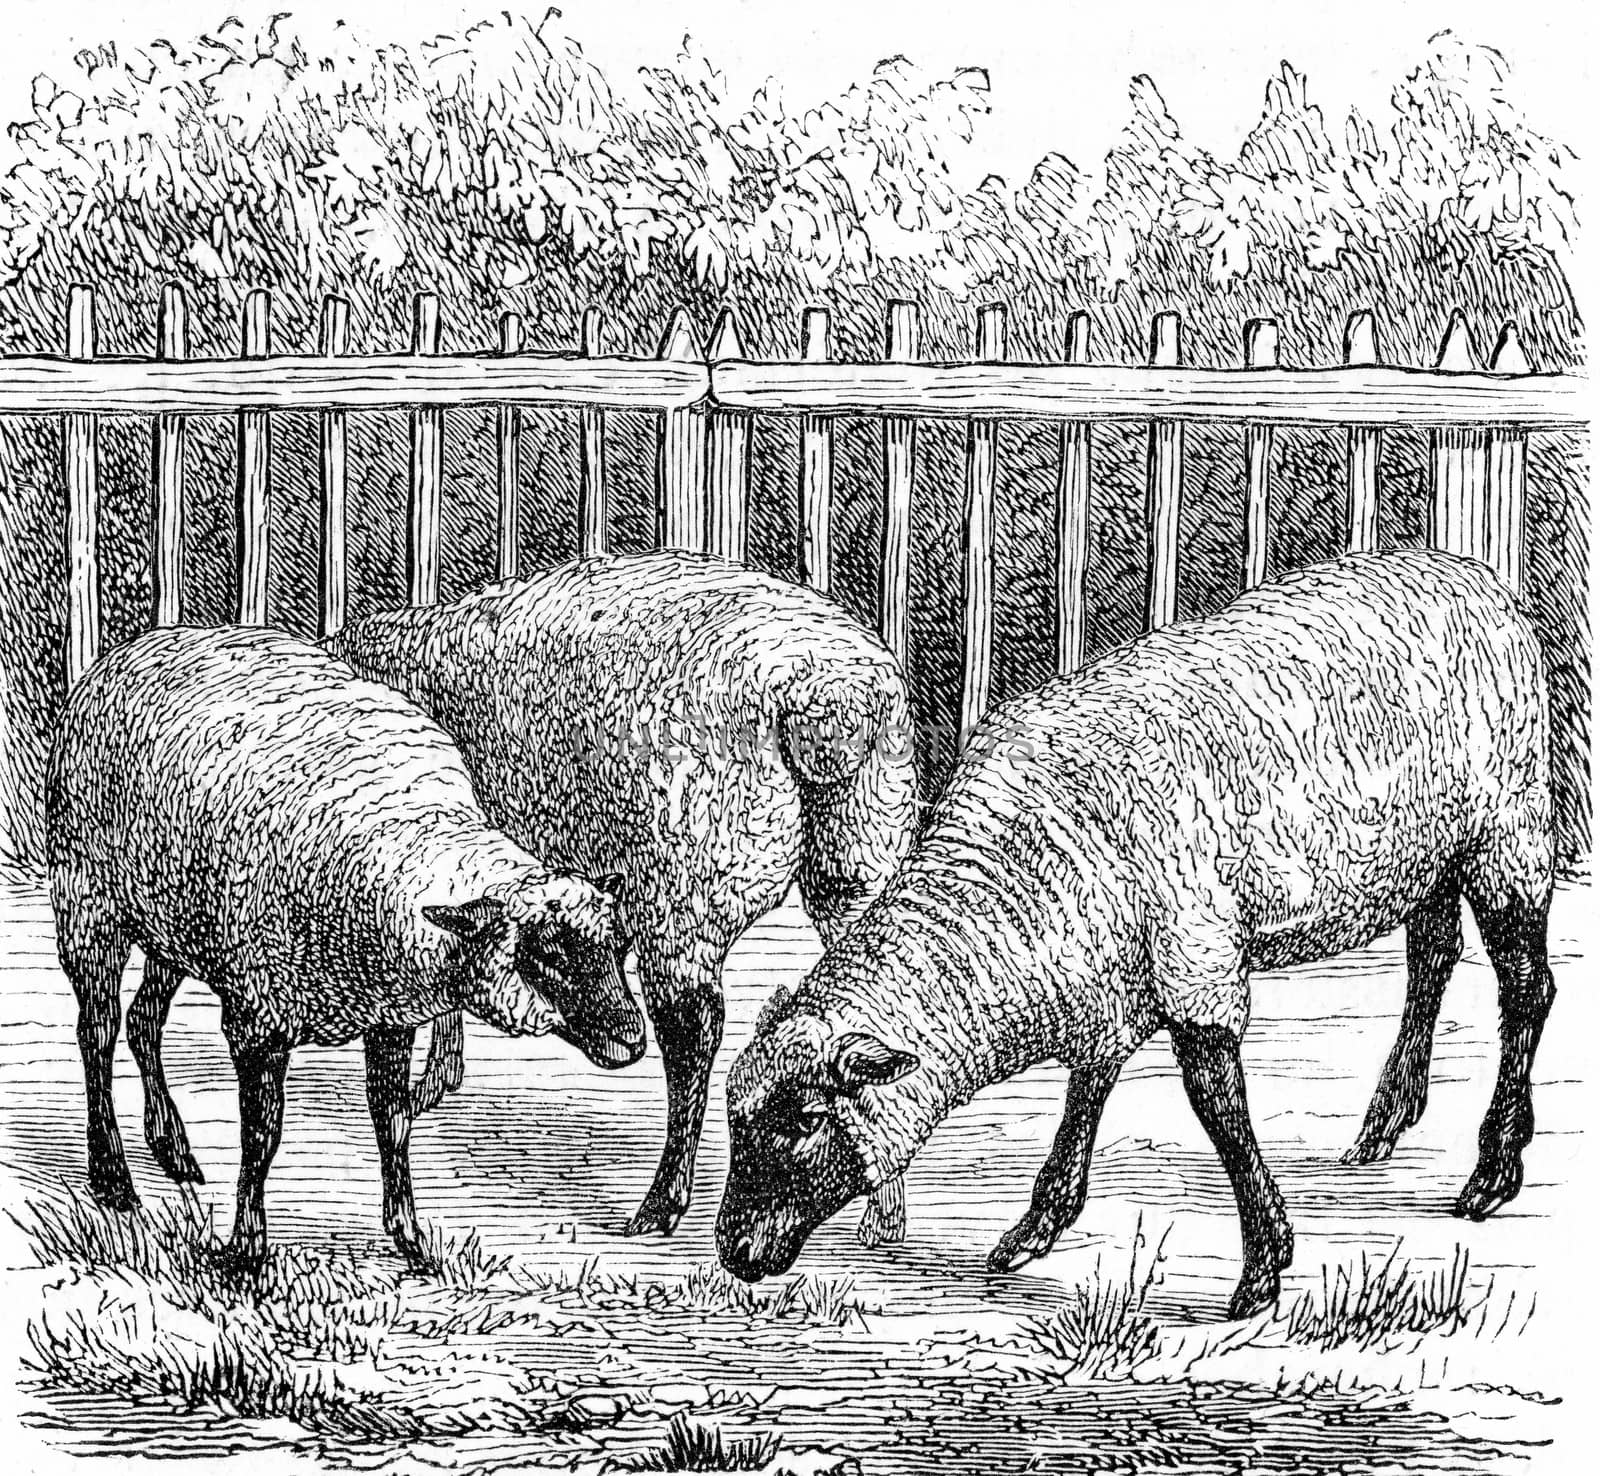 Sheep of the English breed known as south-down, vintage engraved illustration. From Zoology Elements from Paul Gervais.
